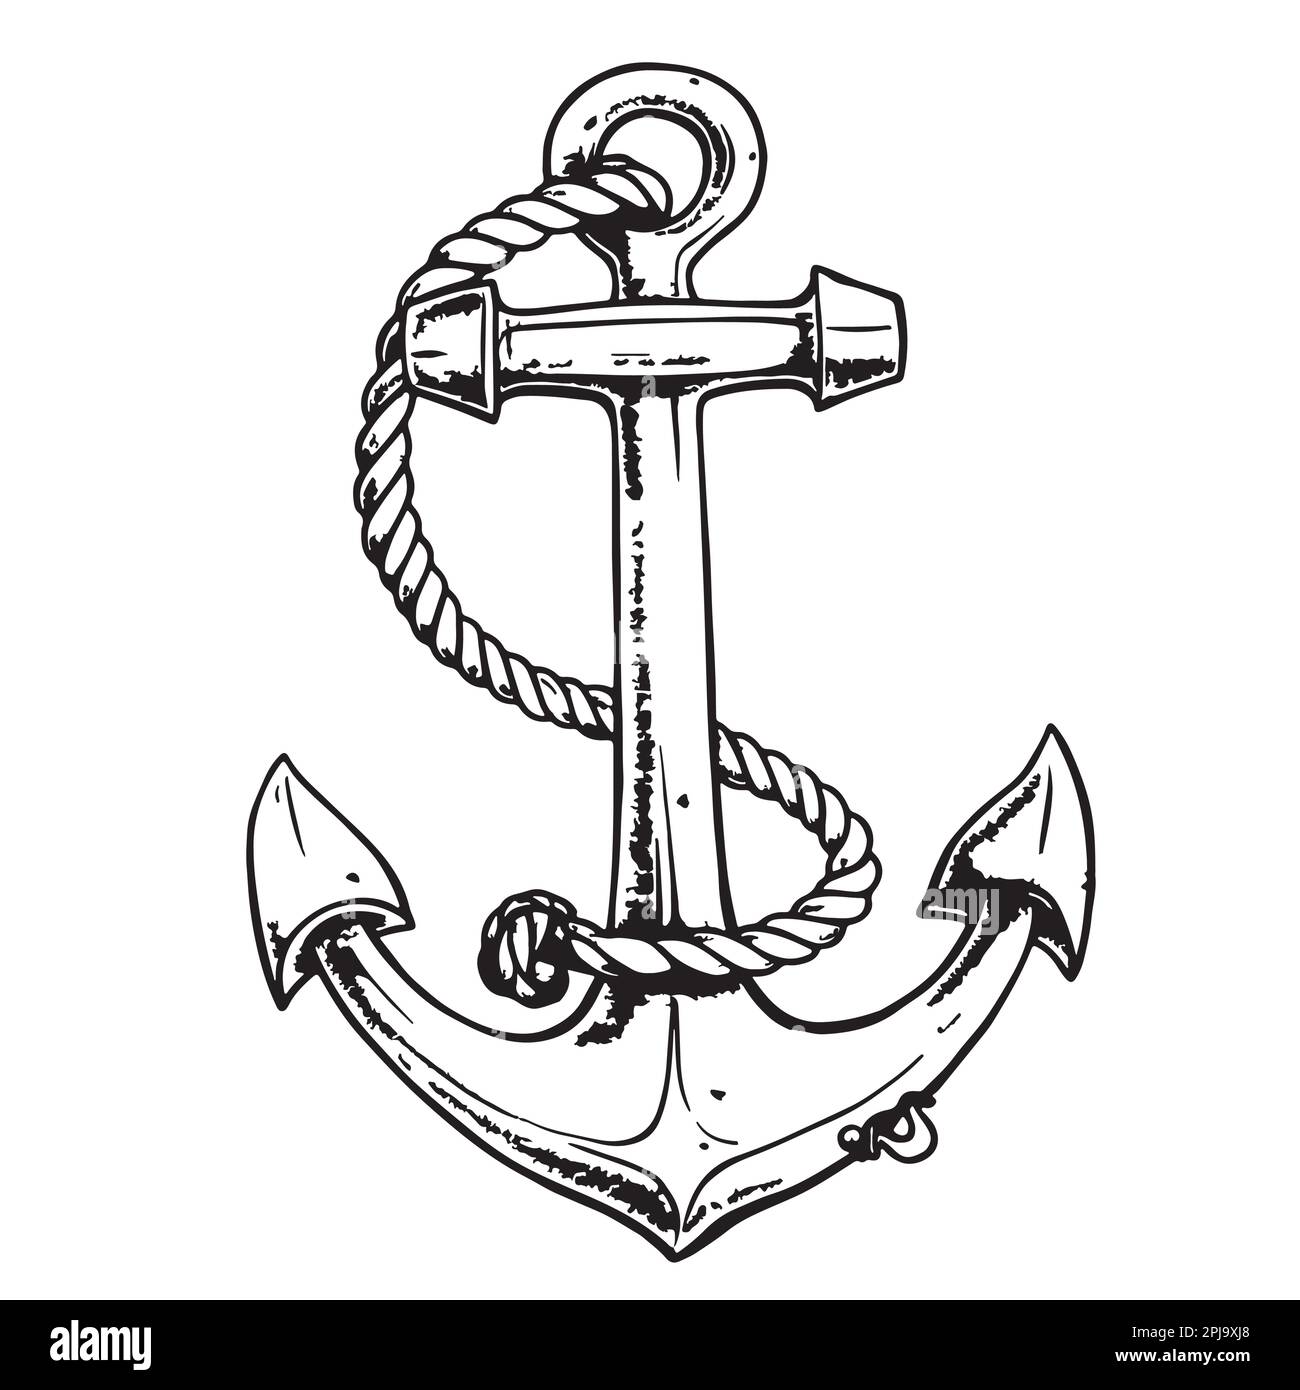 Anchor with rope hand drawn sketch illustration Stock Vector